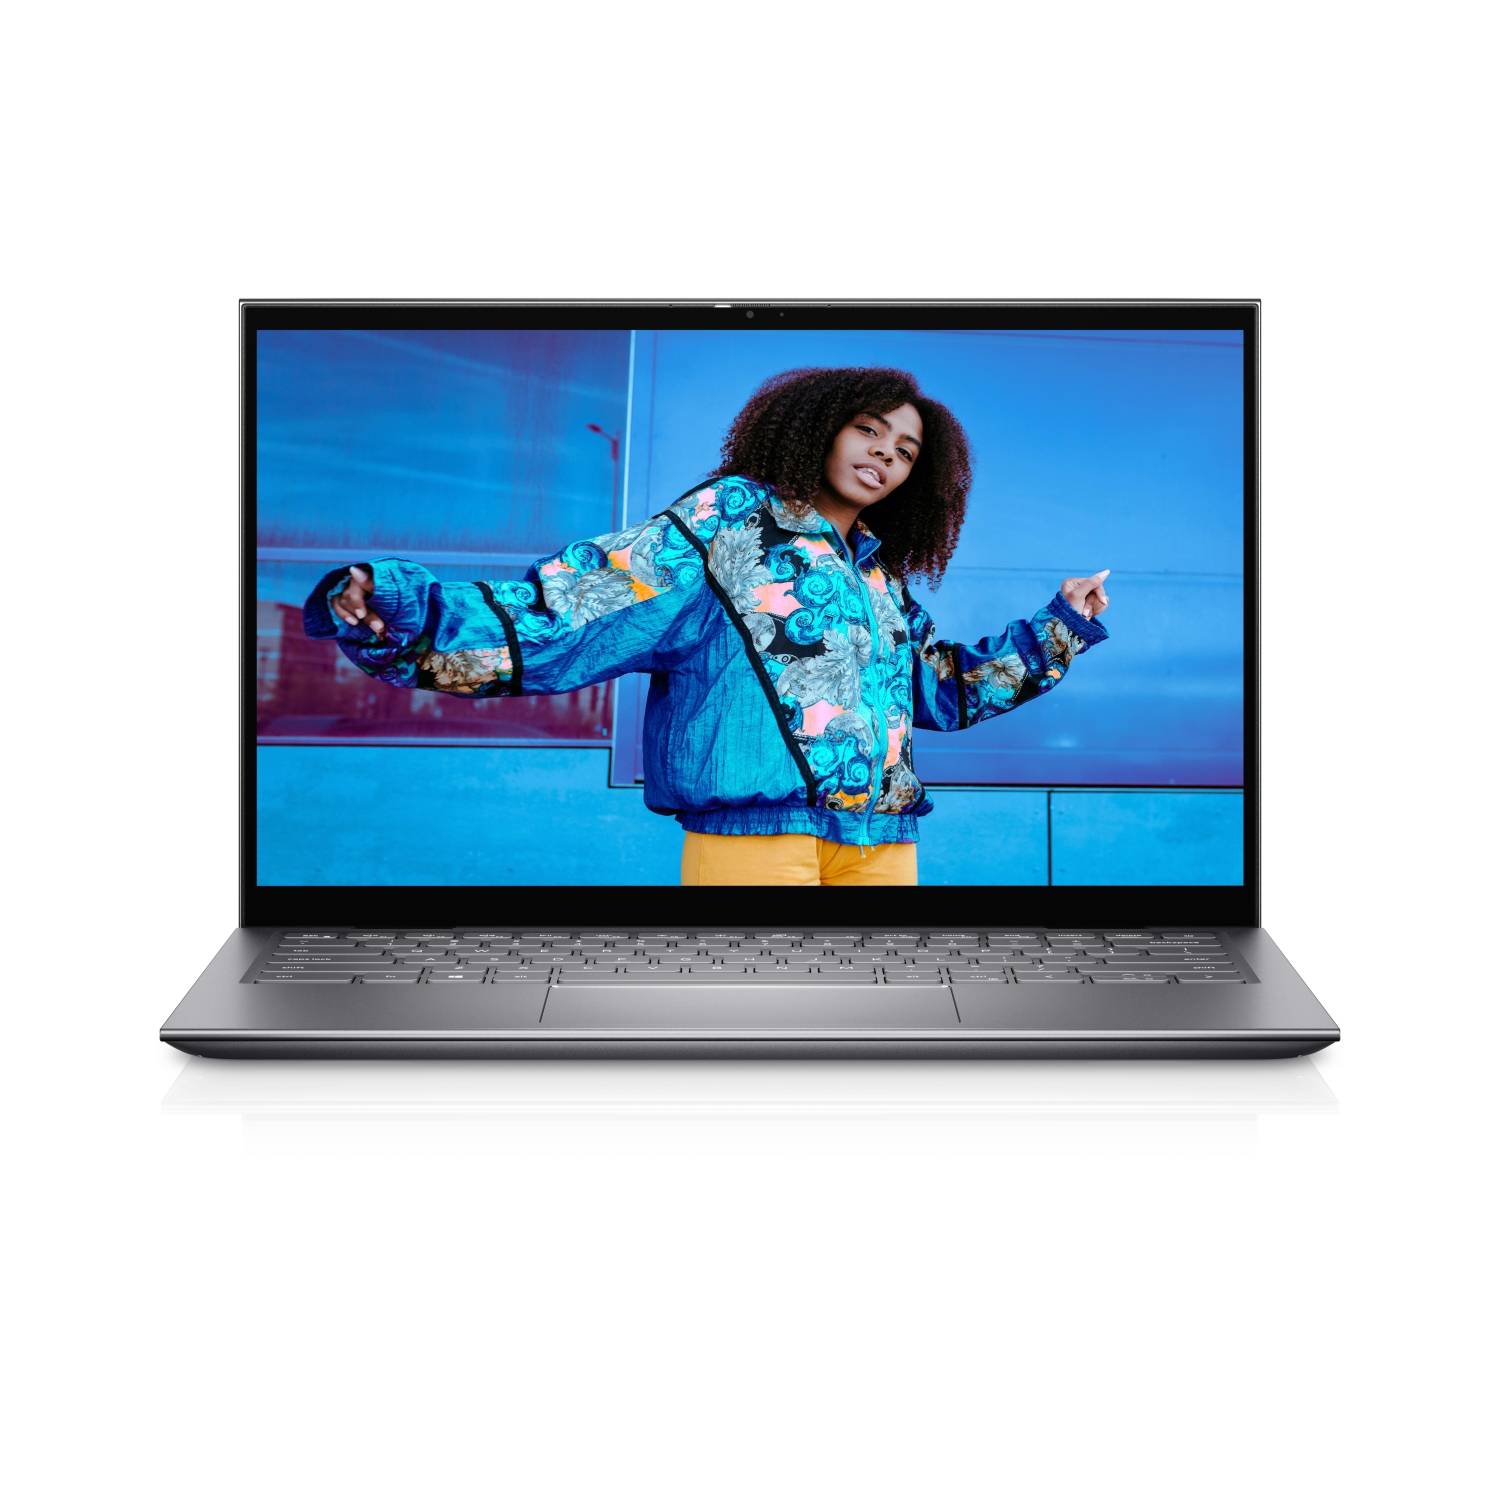 Refurbished (Excellent) – Dell Inspiron 5410 2-in-1 (2021) | 14" FHD Touch | Core i7 - 1TB SSD - 8GB RAM | 4 Cores @ 5 GHz - 11th Gen CPU